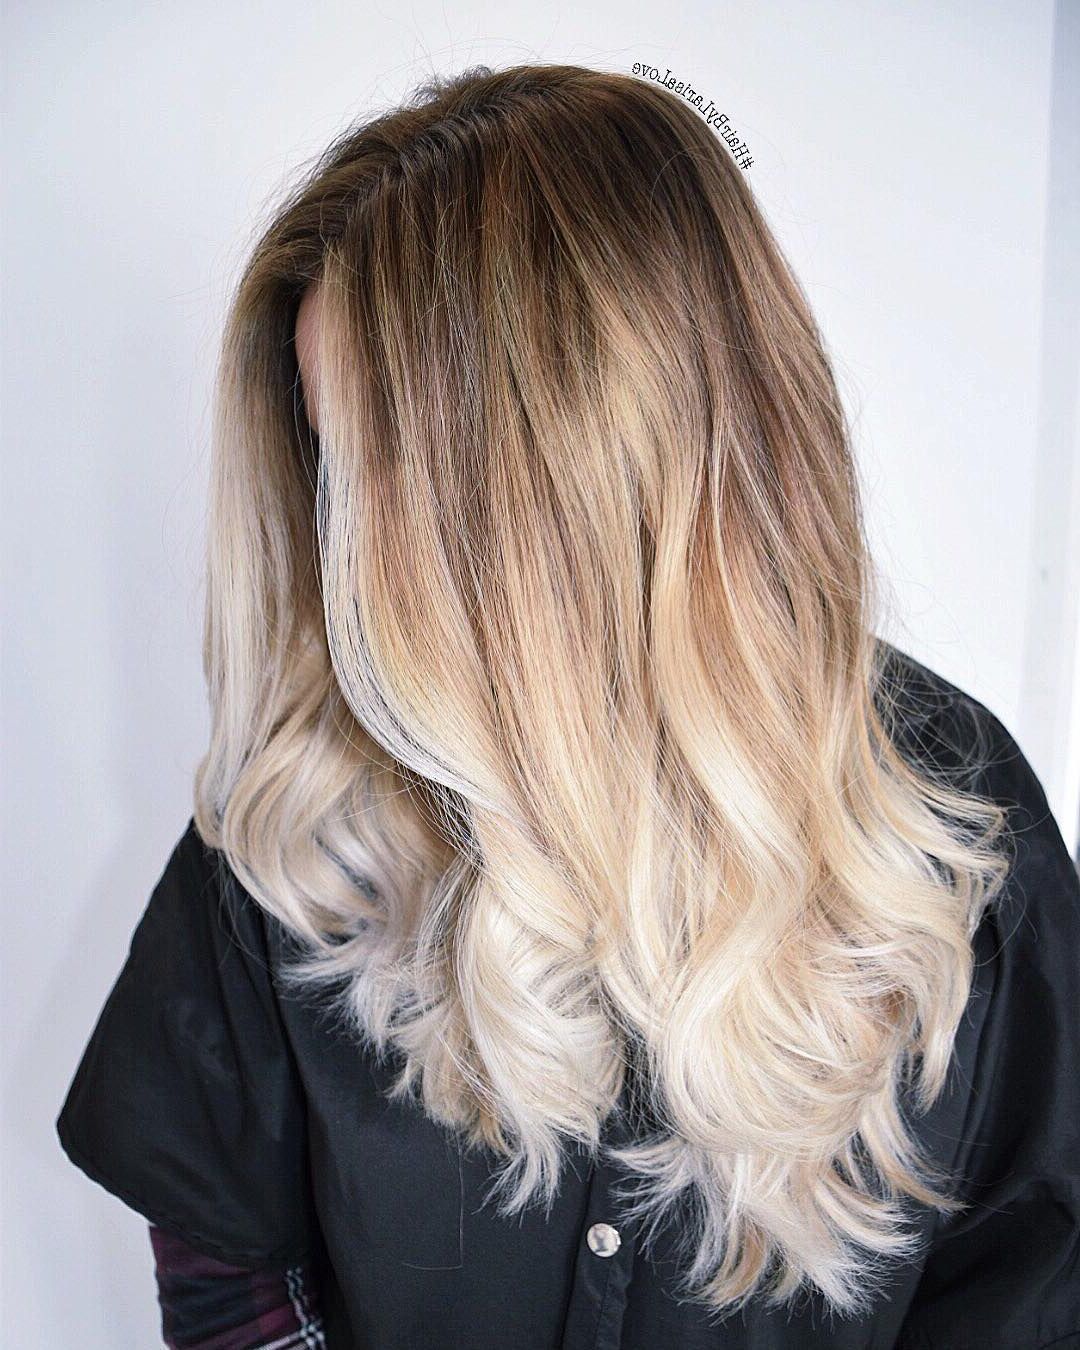 20 Perfect Ways To Get Beach Waves In Your Hair {2019 Update} Intended For Famous Braided Wedding Hairstyles With Subtle Waves (Gallery 20 of 20)